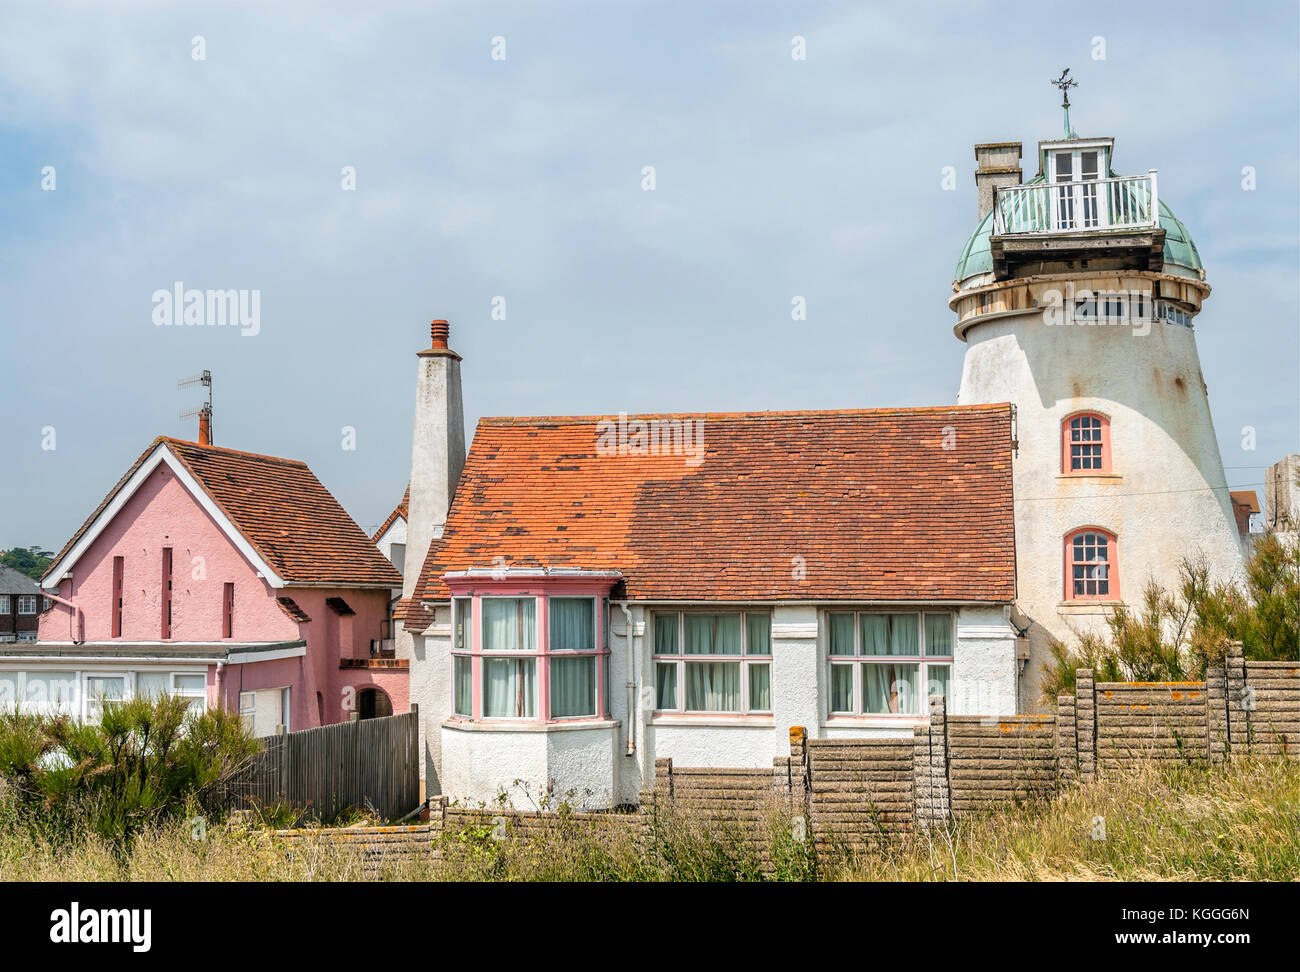 Converted Windmill in Aldeburgh a coastal town in Suffolk, East Anglia, England Stock Photo